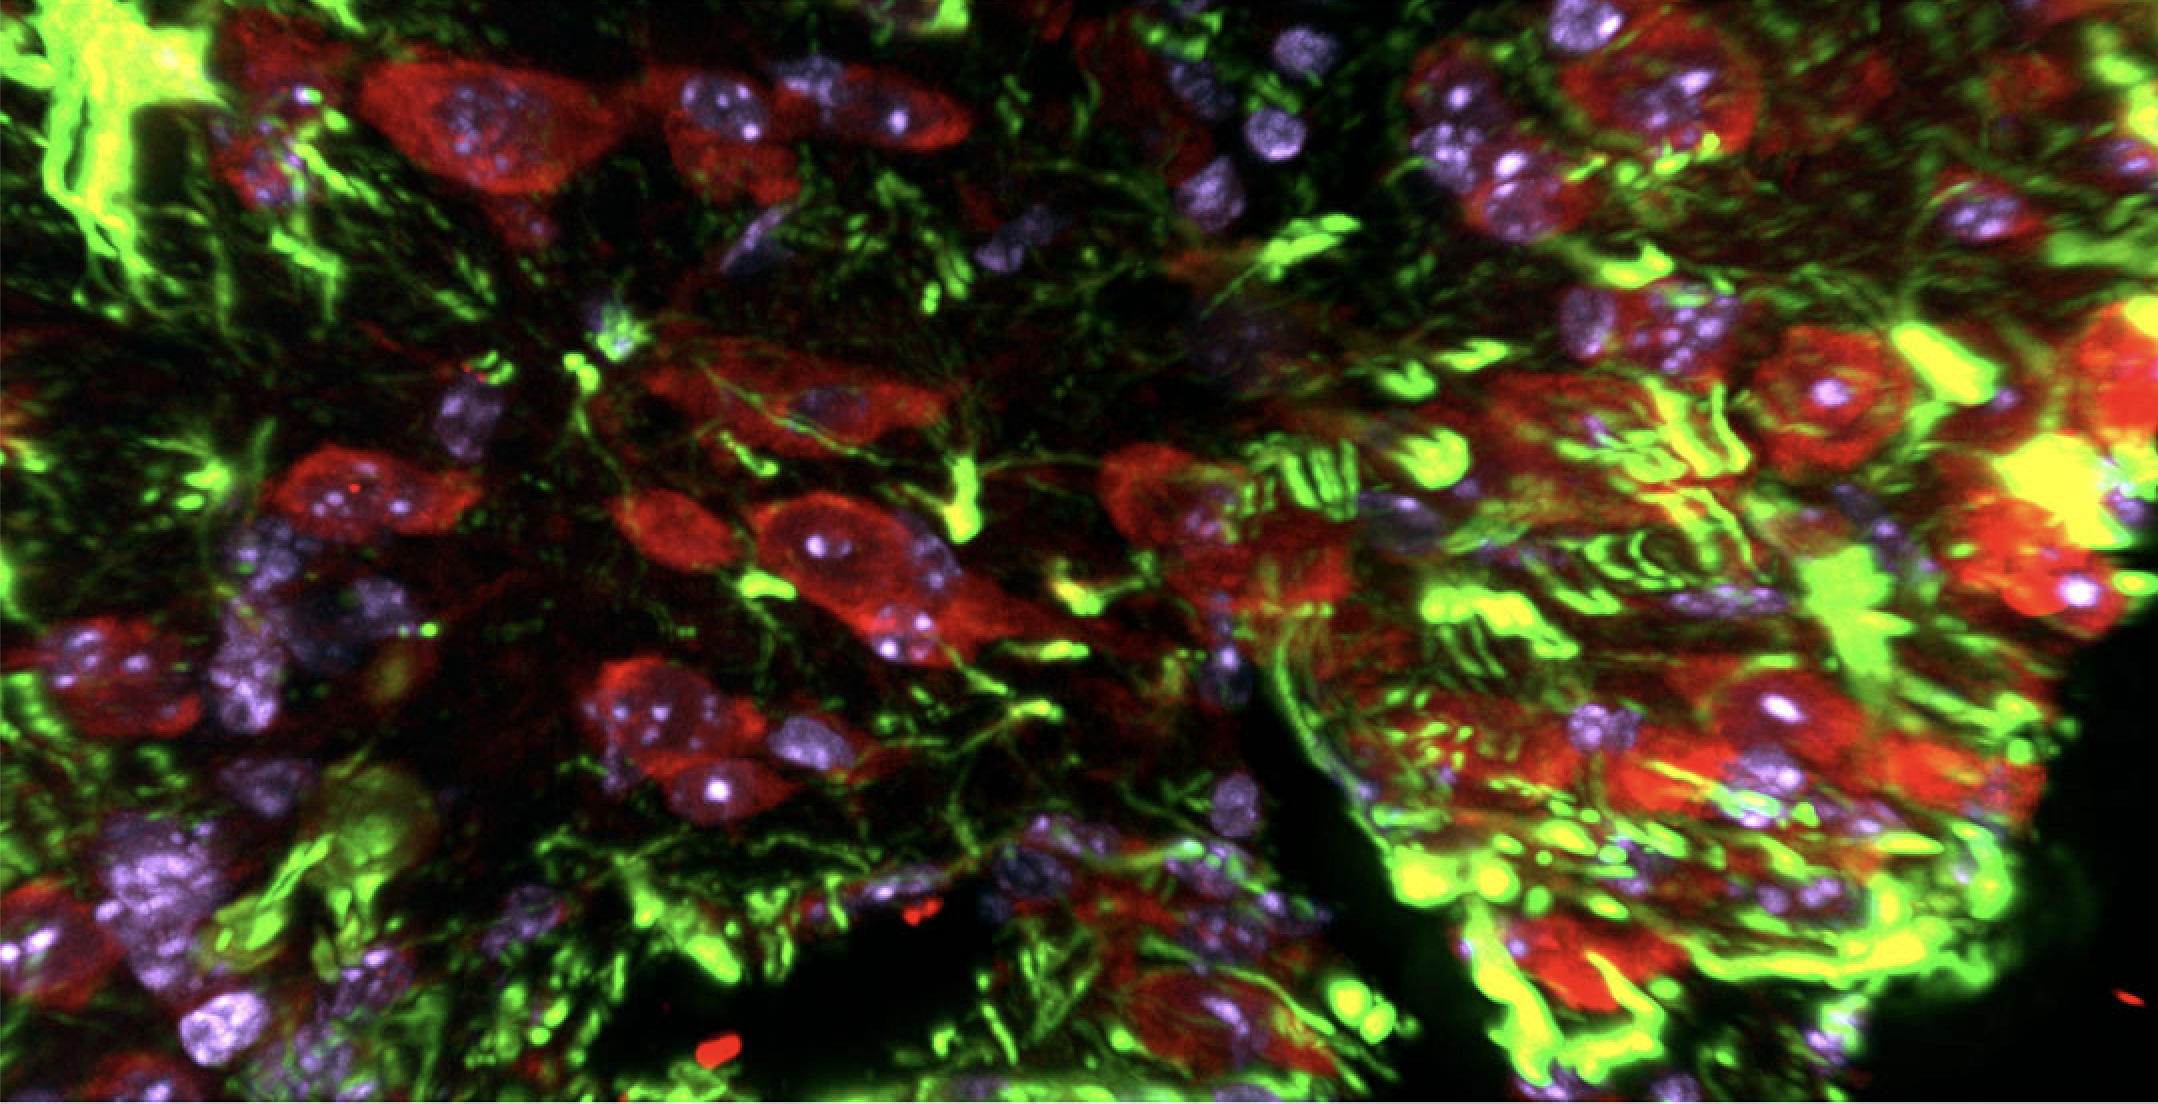 In vivo overexpression of Snail (Red) in microglia/macrophage cells in injured cortex. Reactive astrocytes are labeled in green bordering the injury.